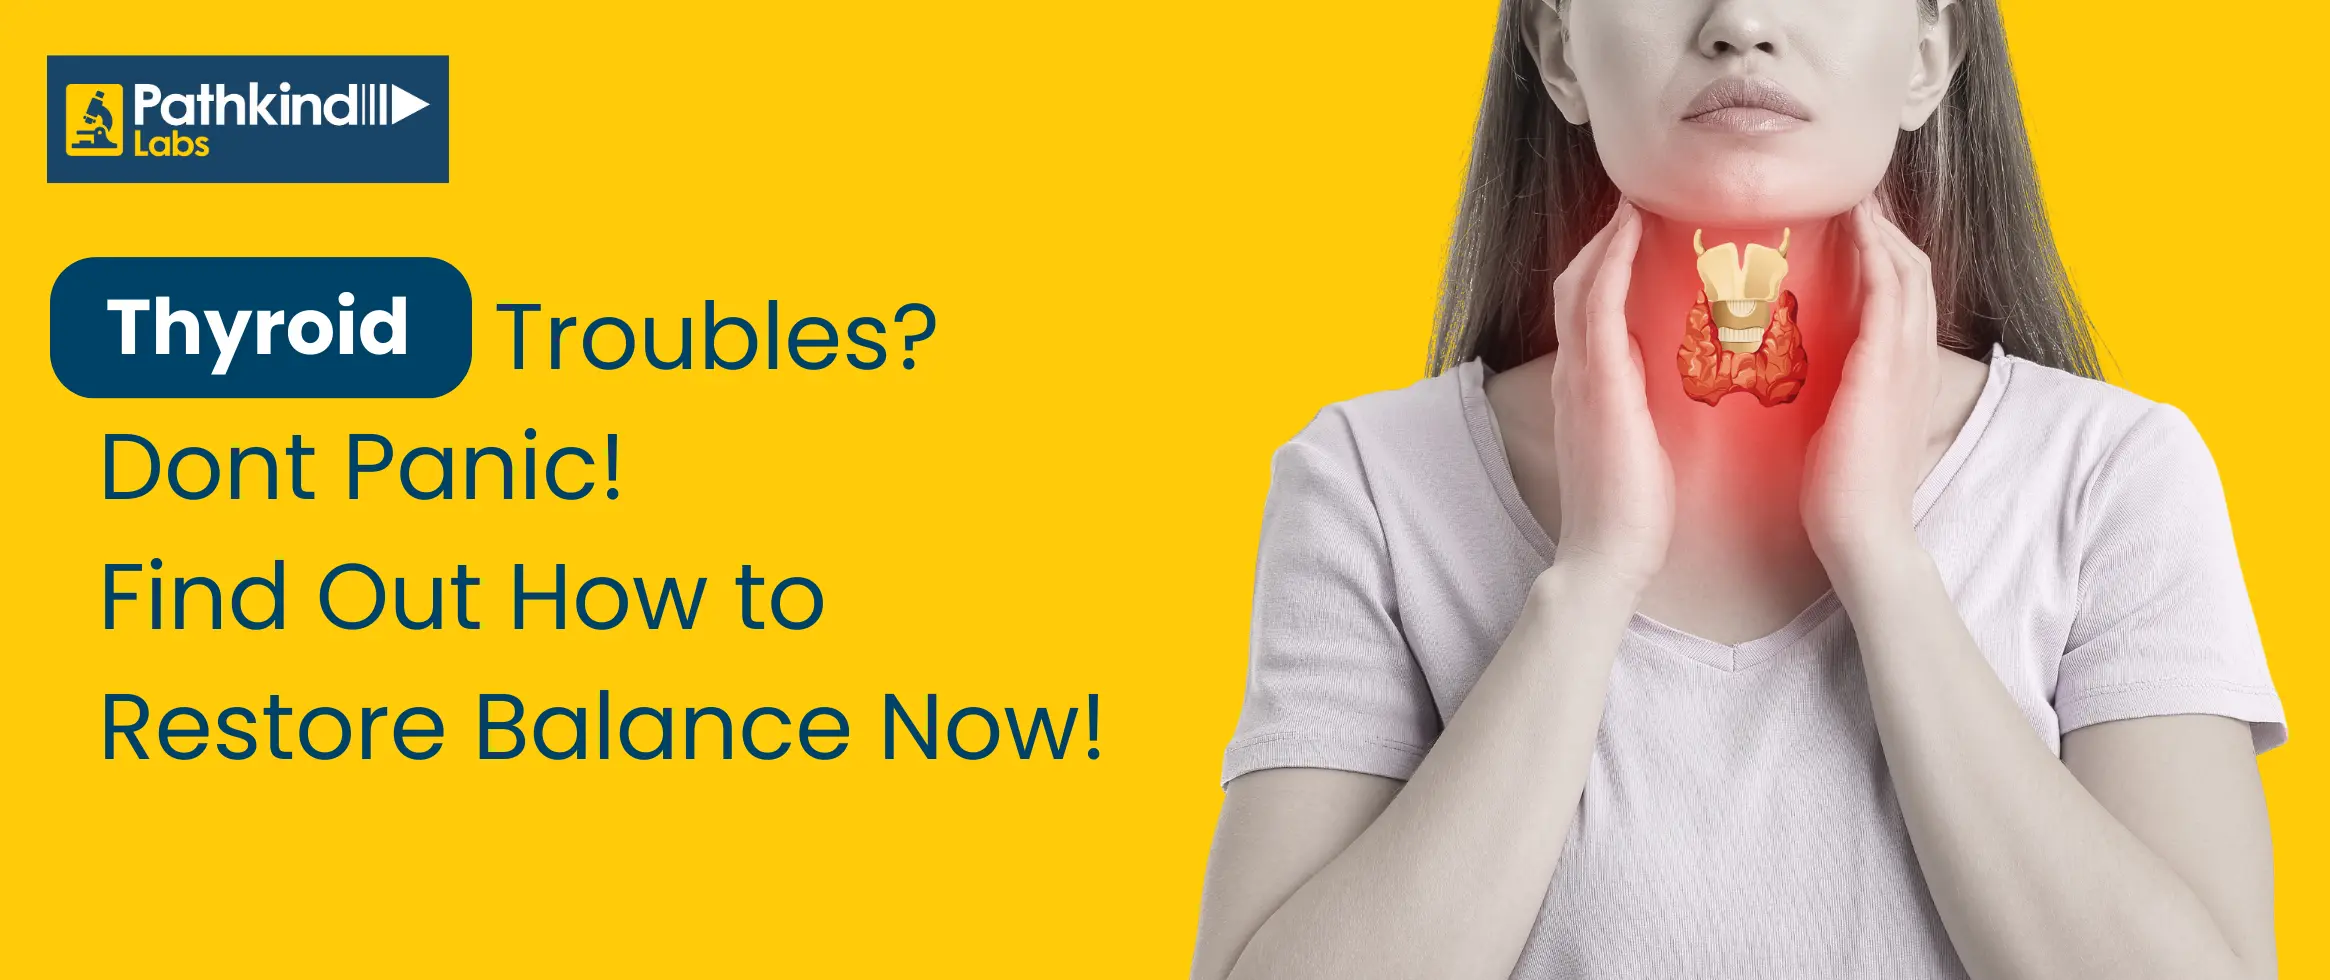  Thyroid Troubles? Don't Panic! Find Out How to Restore Balance Now!